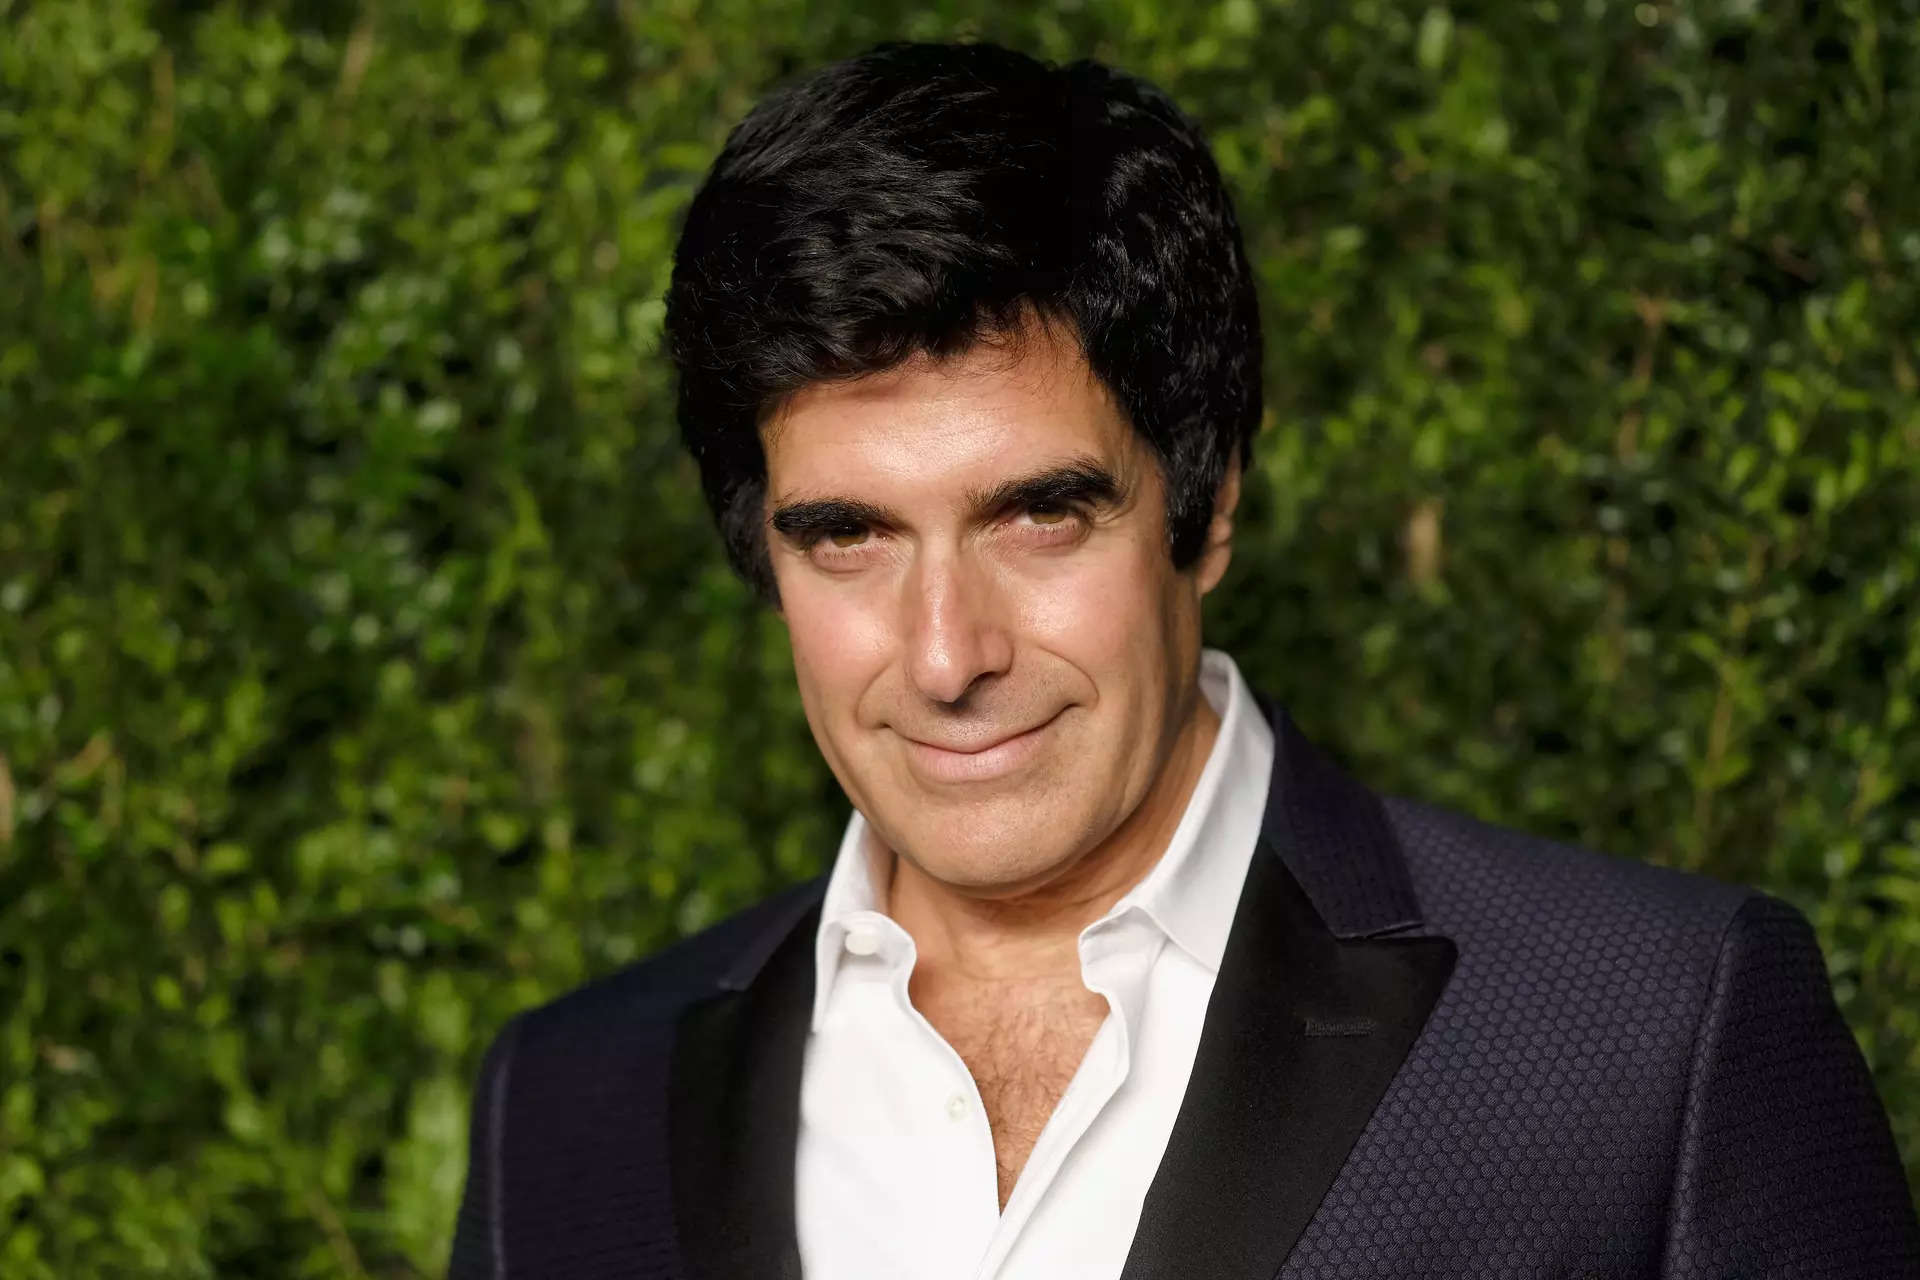 Magician David Copperfield faces allegations of sexual misconduct from multiple women: Report